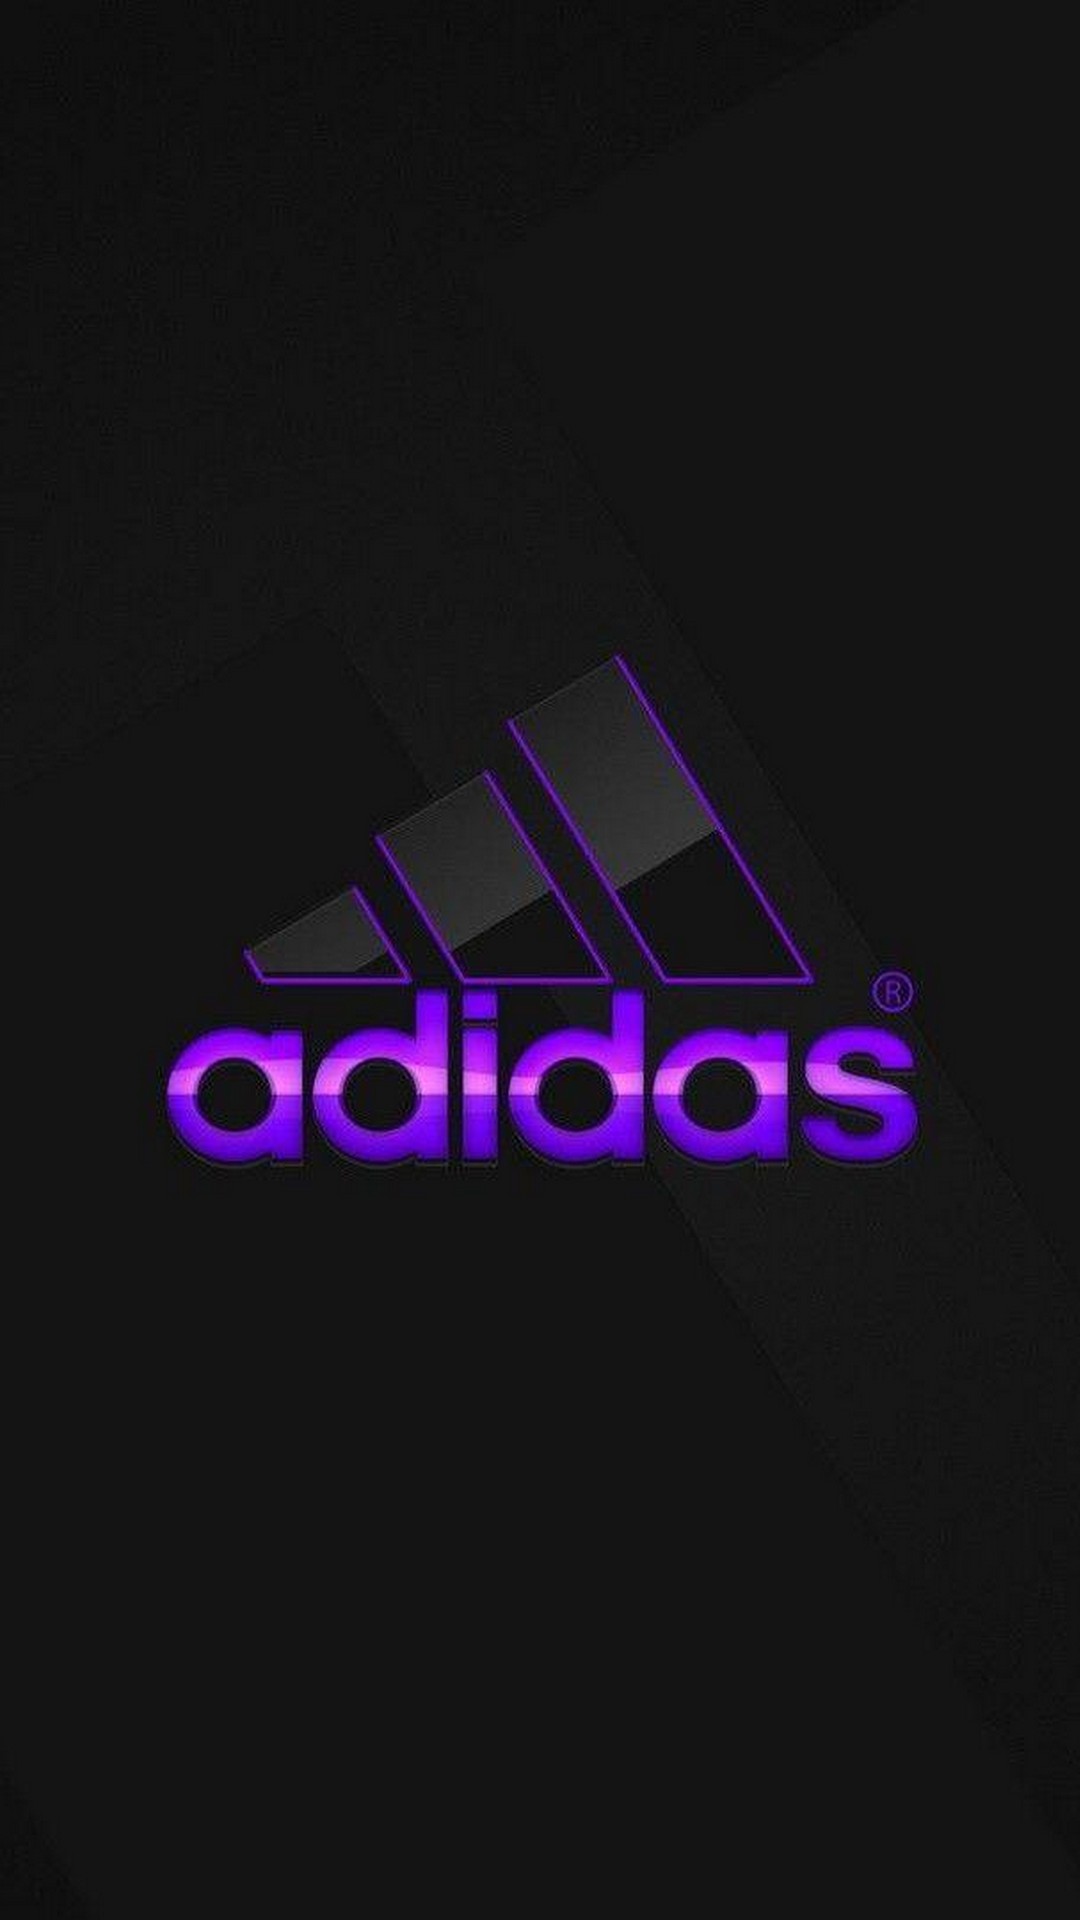 Adidas iPhone X Wallpaper HD with high-resolution 1080x1920 pixel. Download all Mobile Wallpapers and Use them as wallpapers for your iPhone, Tablet, iPad, Android and other mobile devices